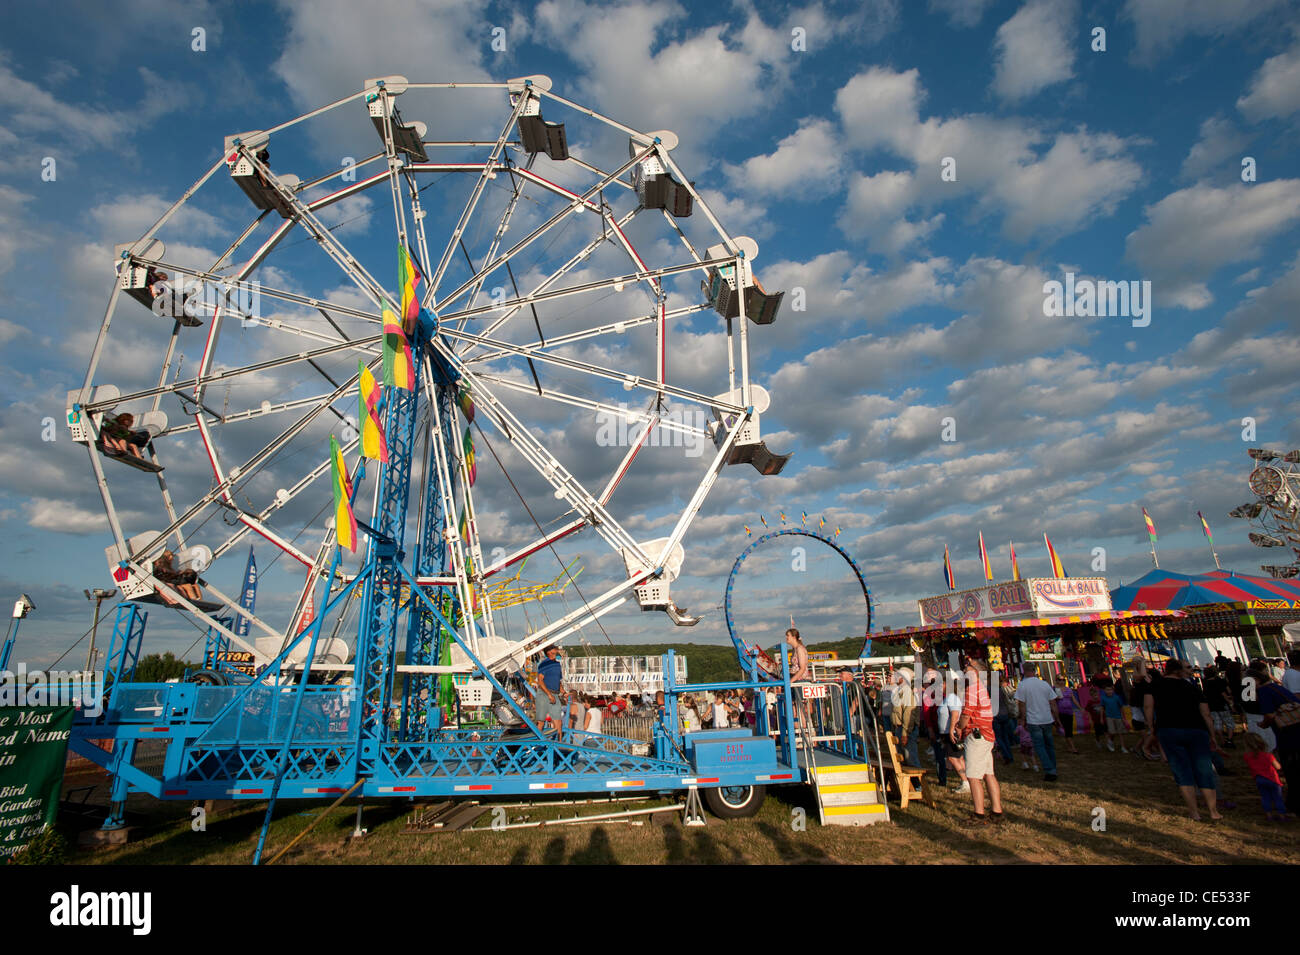 Ferris wheel in front of blue sky and crowd at Mason Dixon Fair Stock Photo